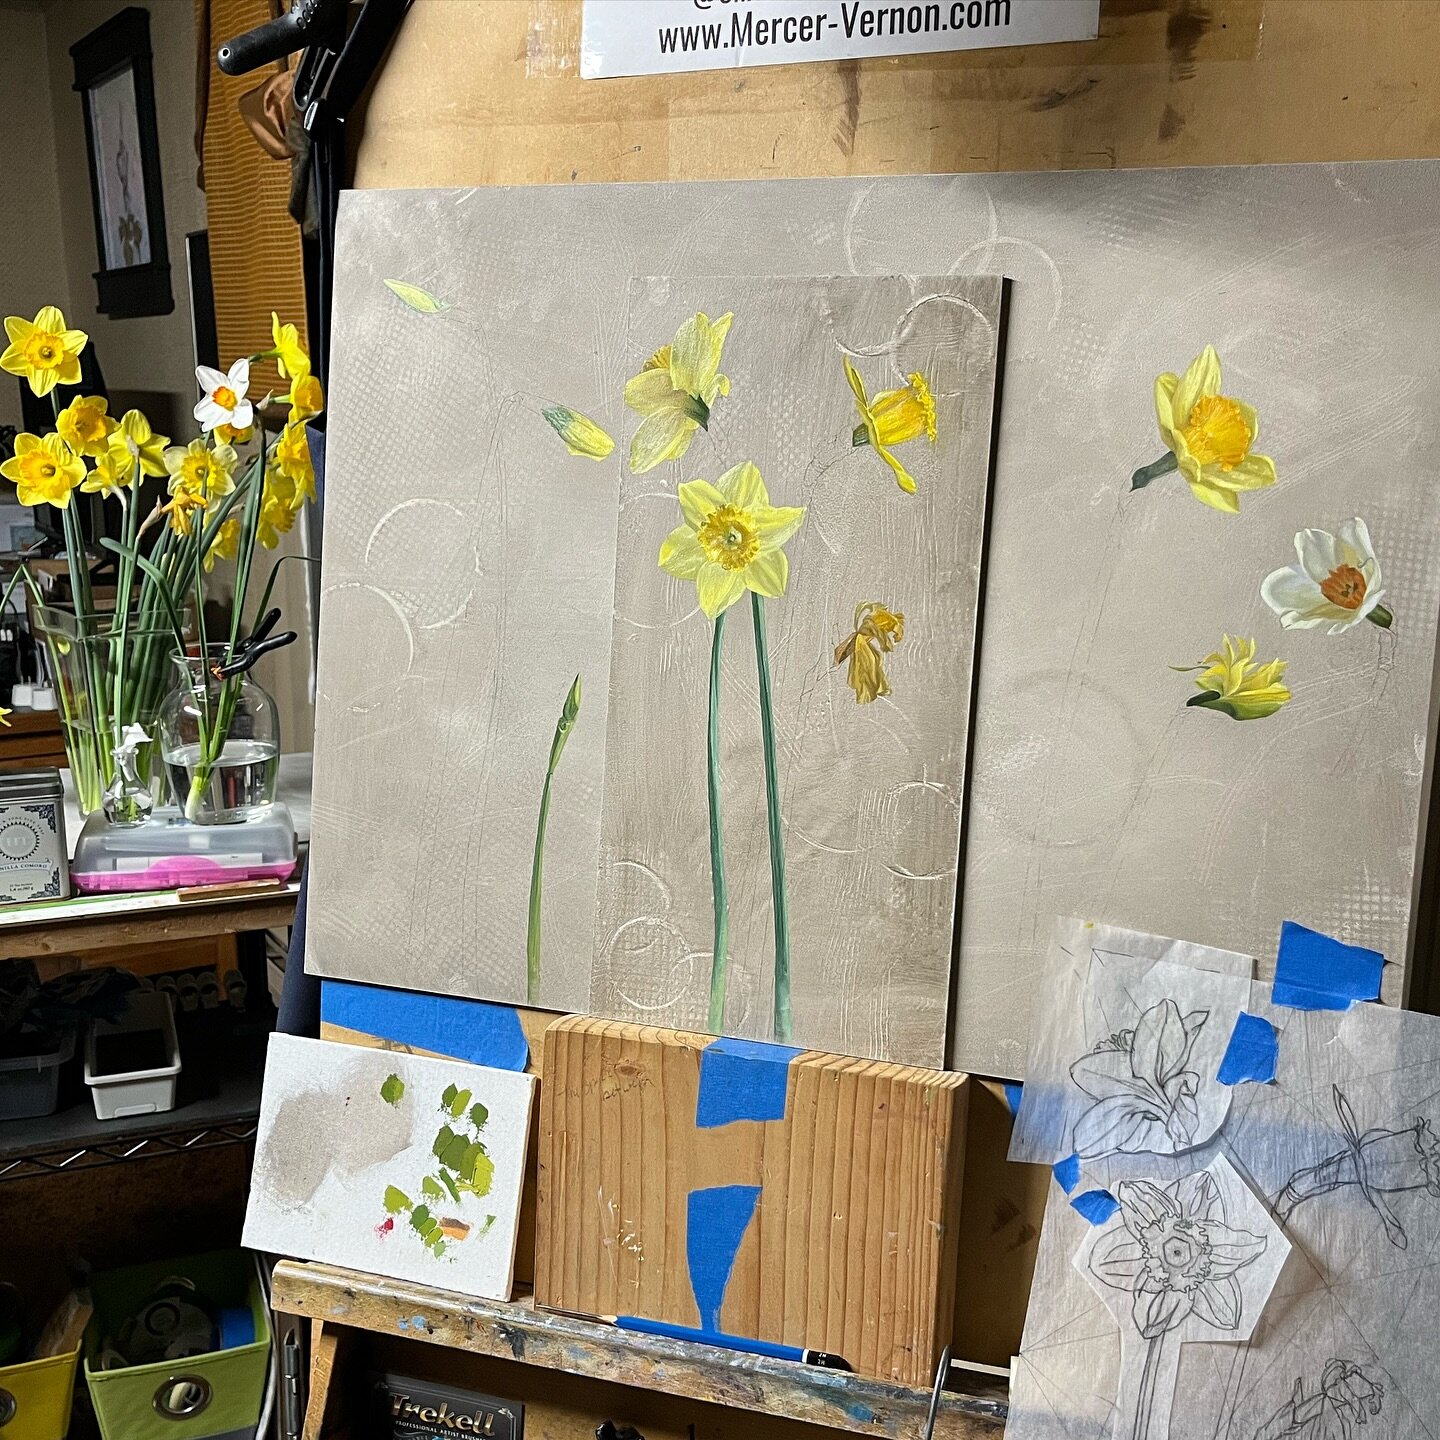 🌼 The state of things. It&rsquo;s always chaotic painting spring flowers. They don&rsquo;t bloom for long. So I try to work in small groups of blooms first, then greens, then repeat. Literally as fast as I can. 

🌼 I&rsquo;ll be showing a lot of wo